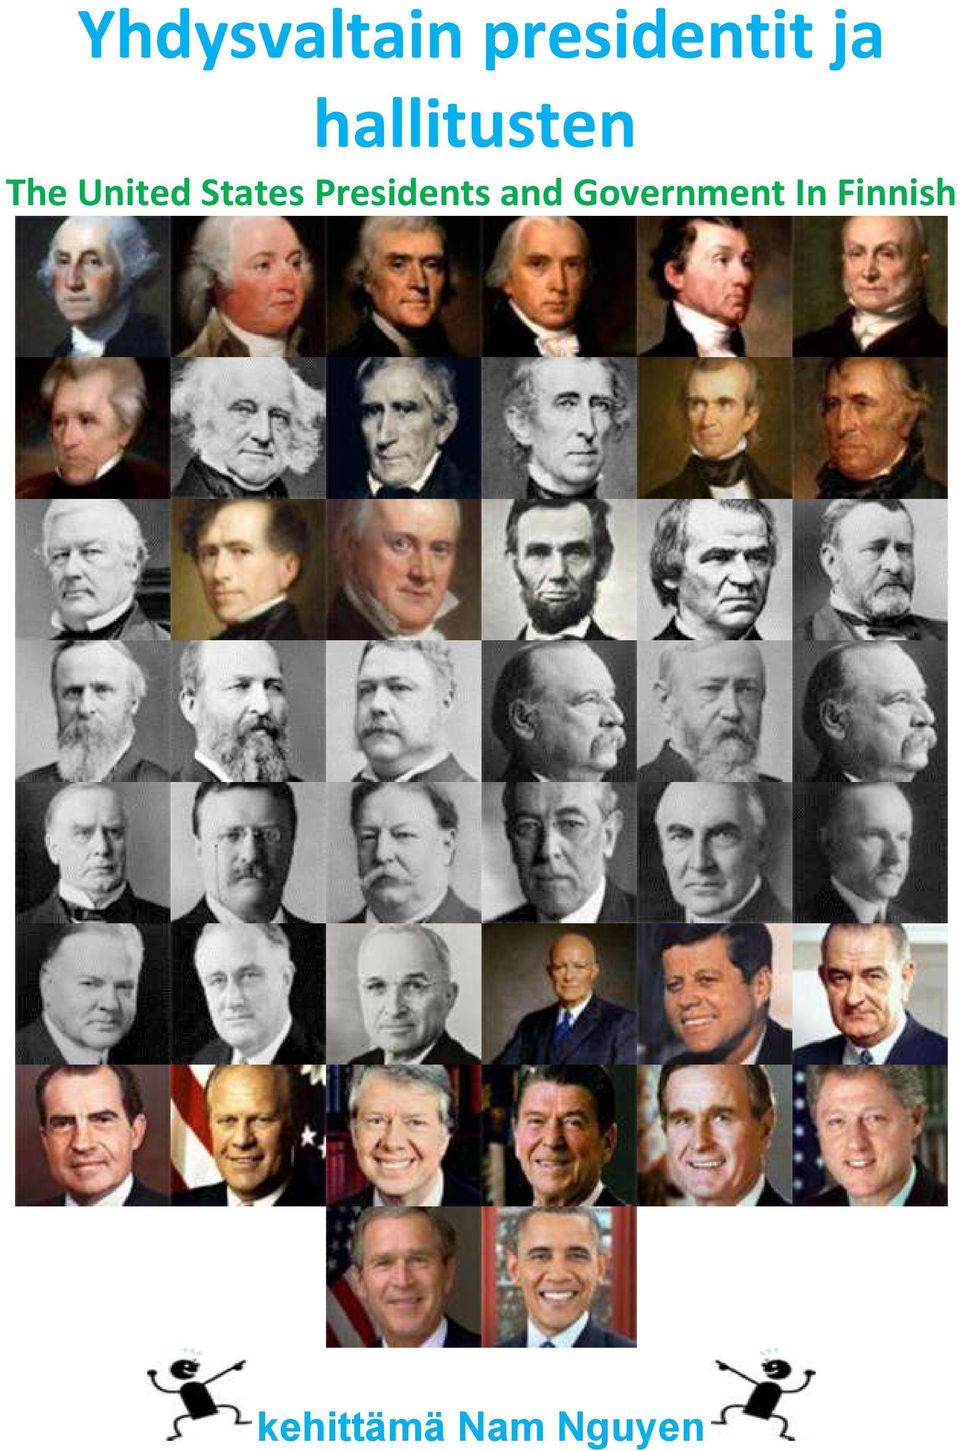 States Presidents and